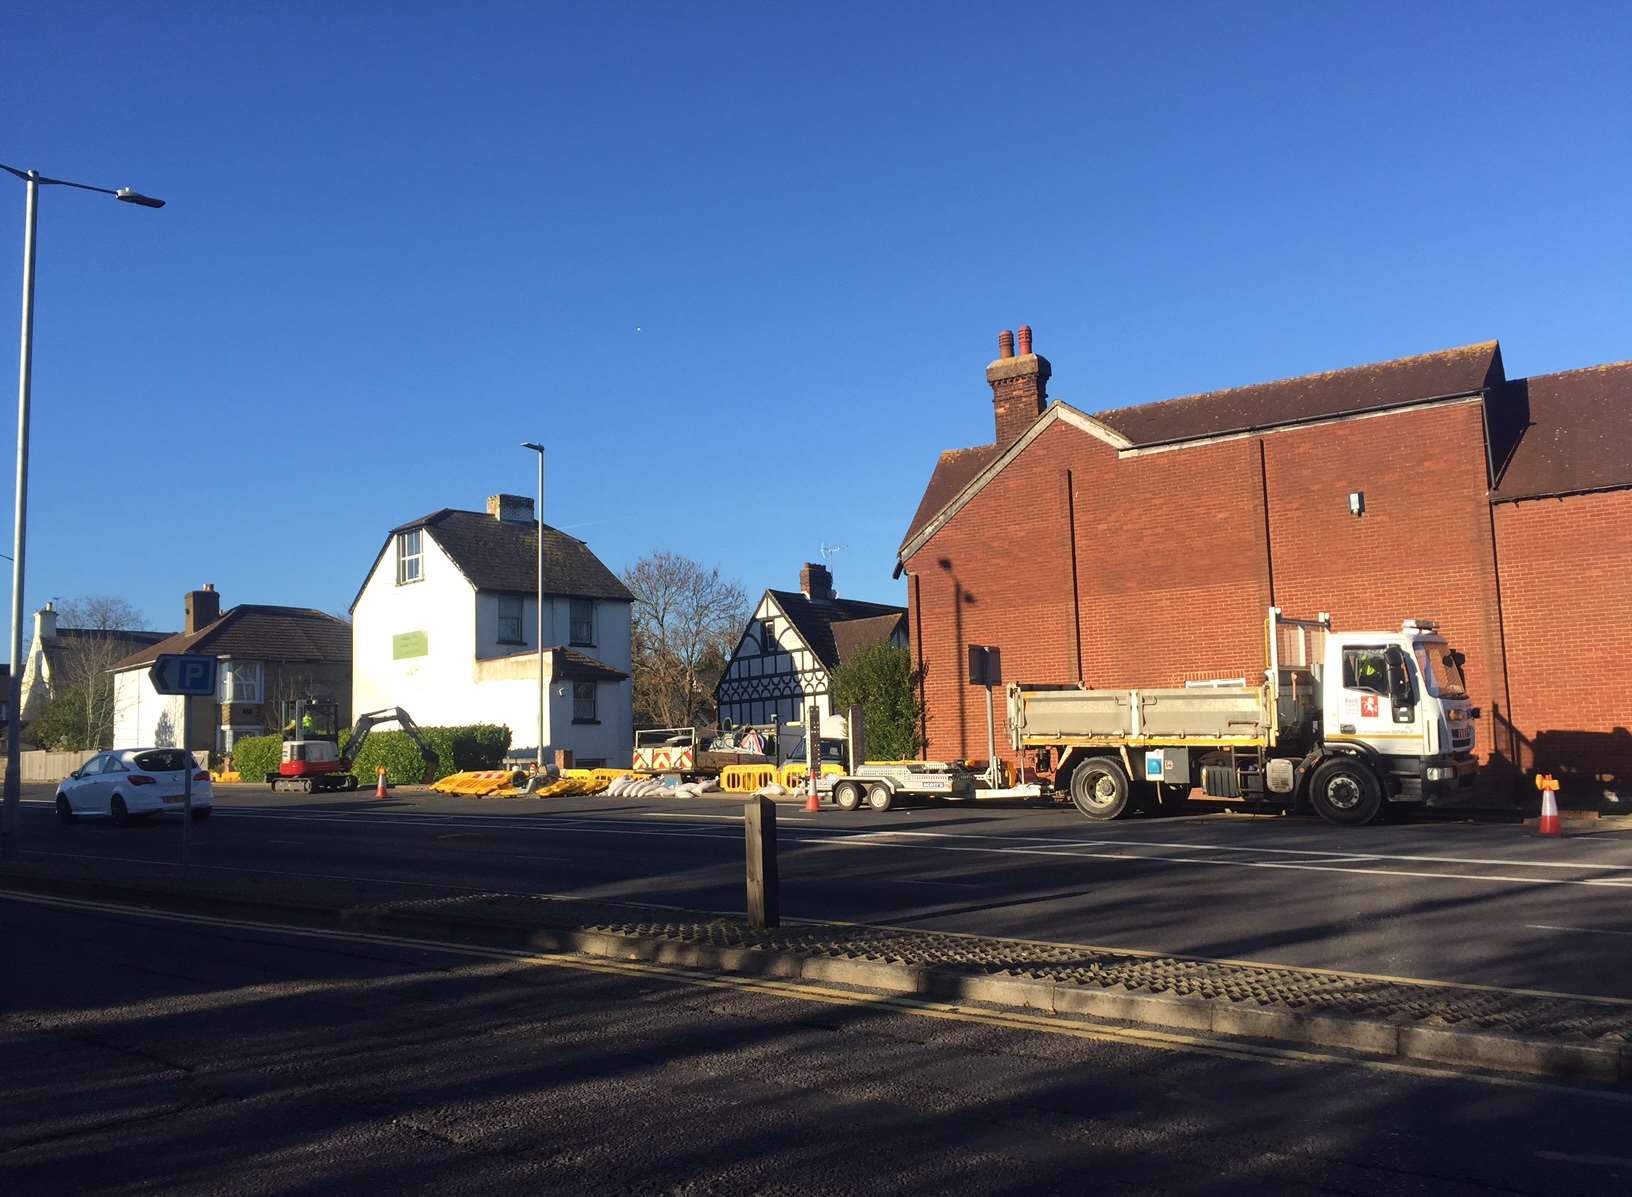 A lane has been partially closed for the work to take place